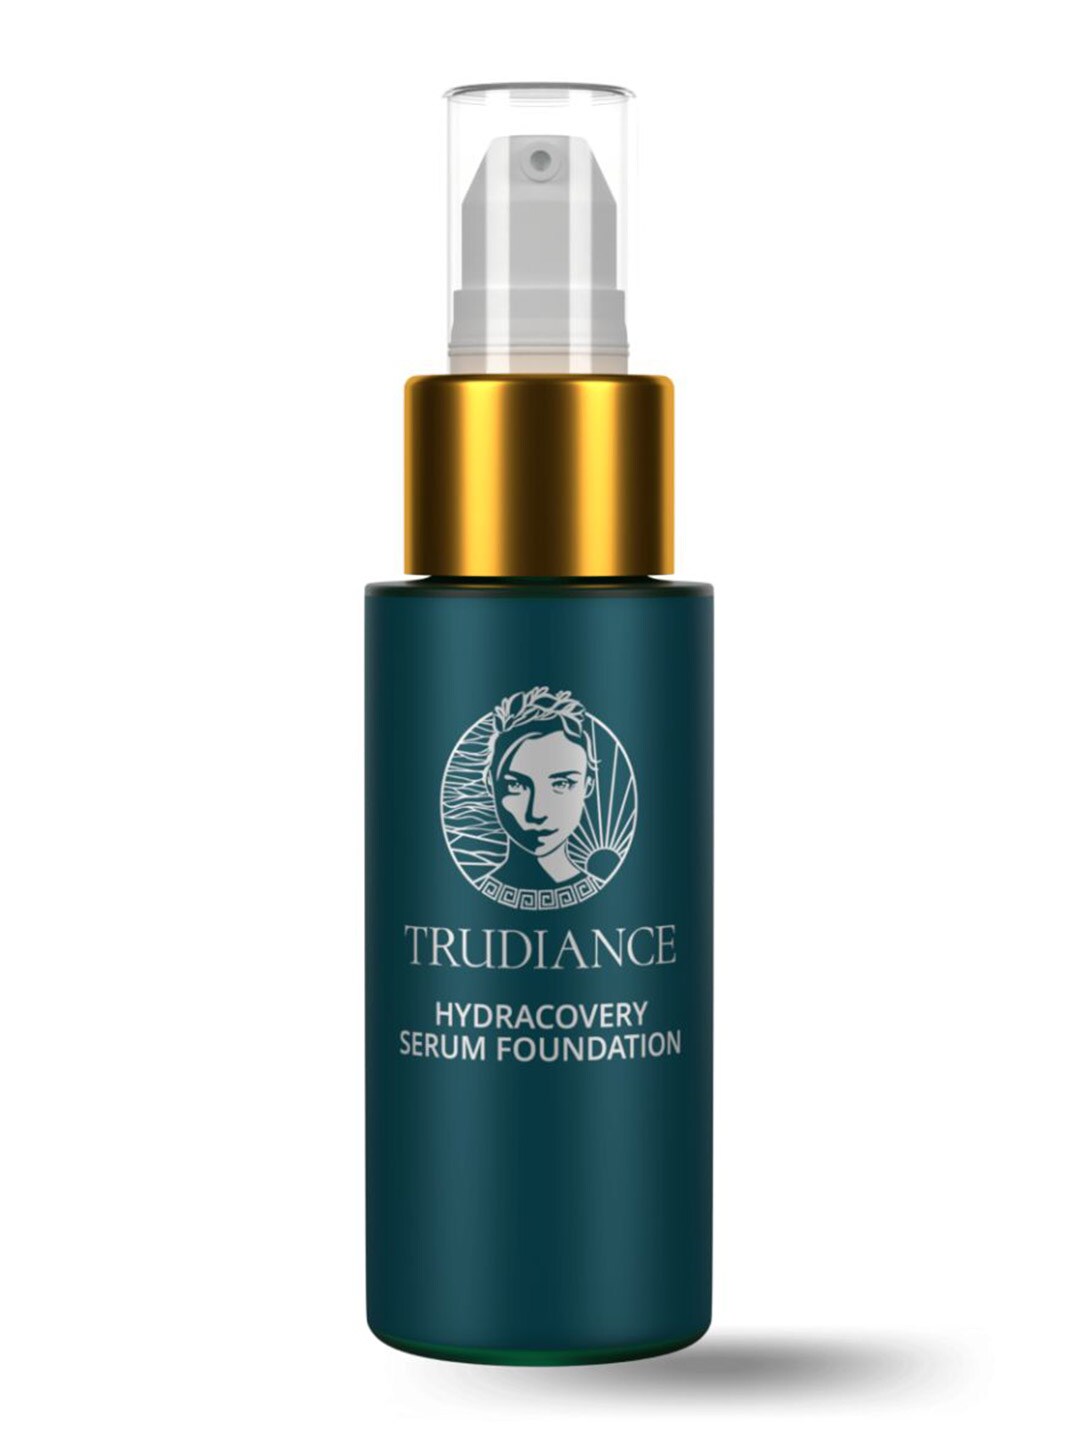 TRUDIANCE HydraCovery Serum Foundation - Golden Beryl 30ml Price in India